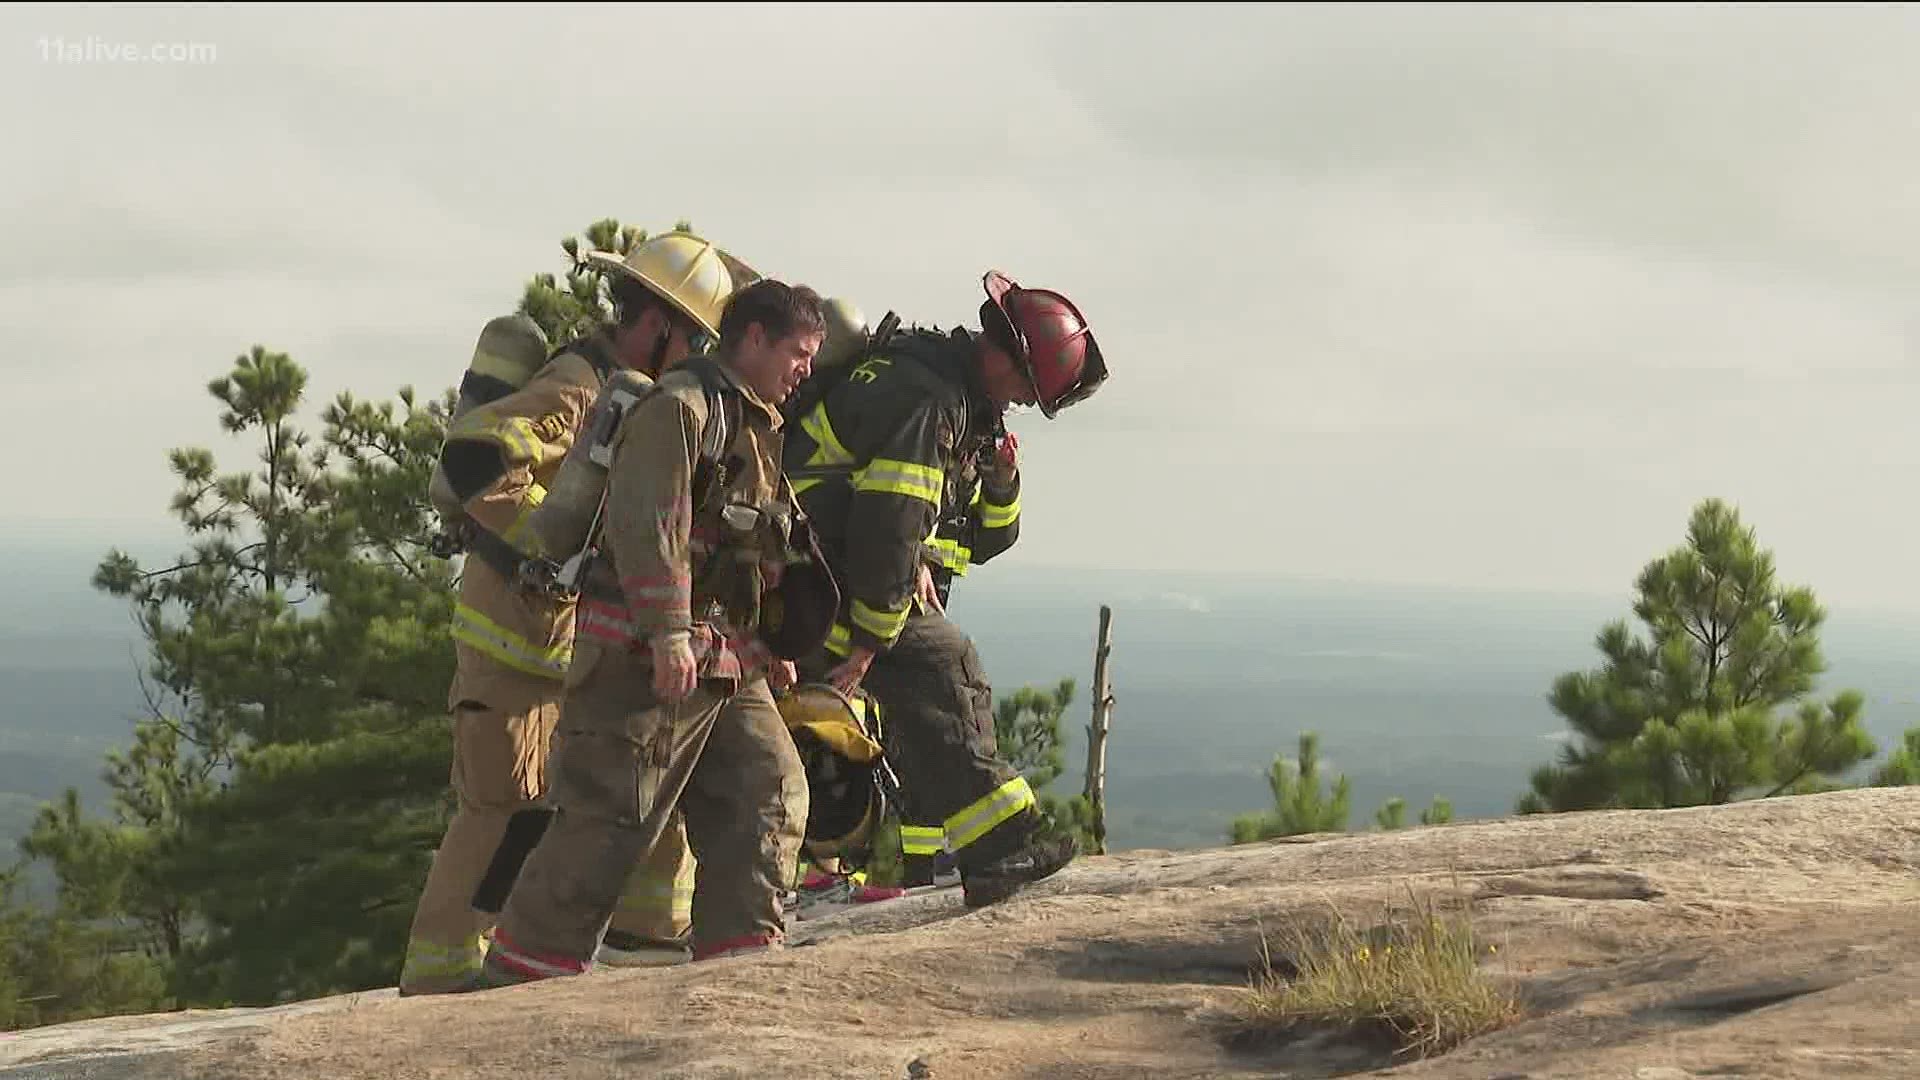 In their annual tradition on the anniversary of 9/11, first responders dressed in full gear to climb Stone Mountain.